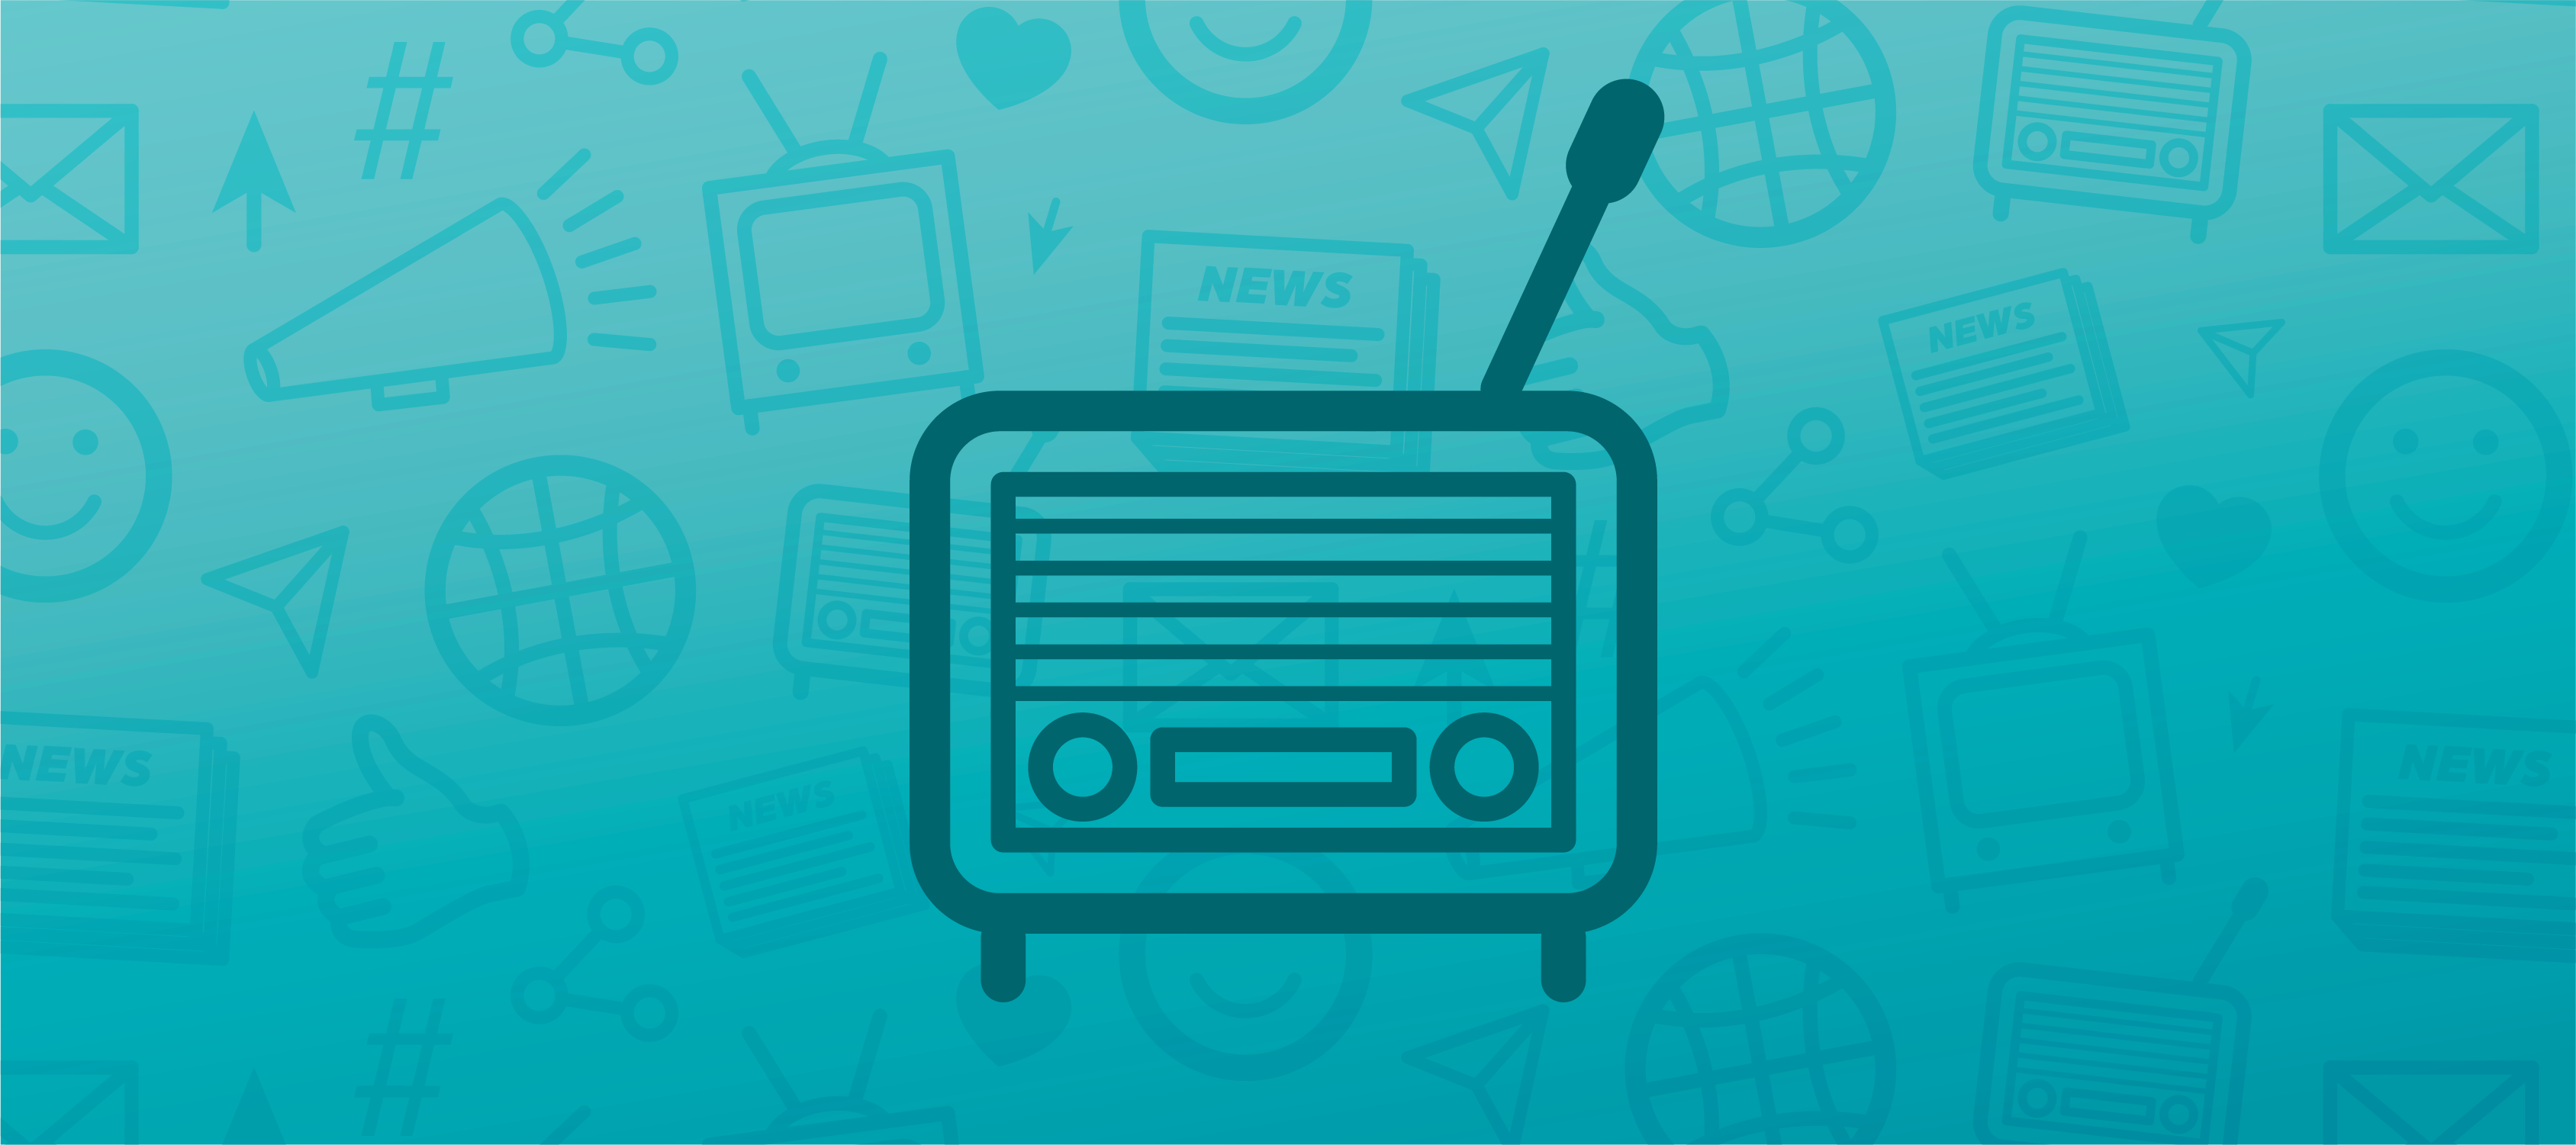 A blue header image featuring an icon of an old timey radio in the center and faded marketing icons in the background